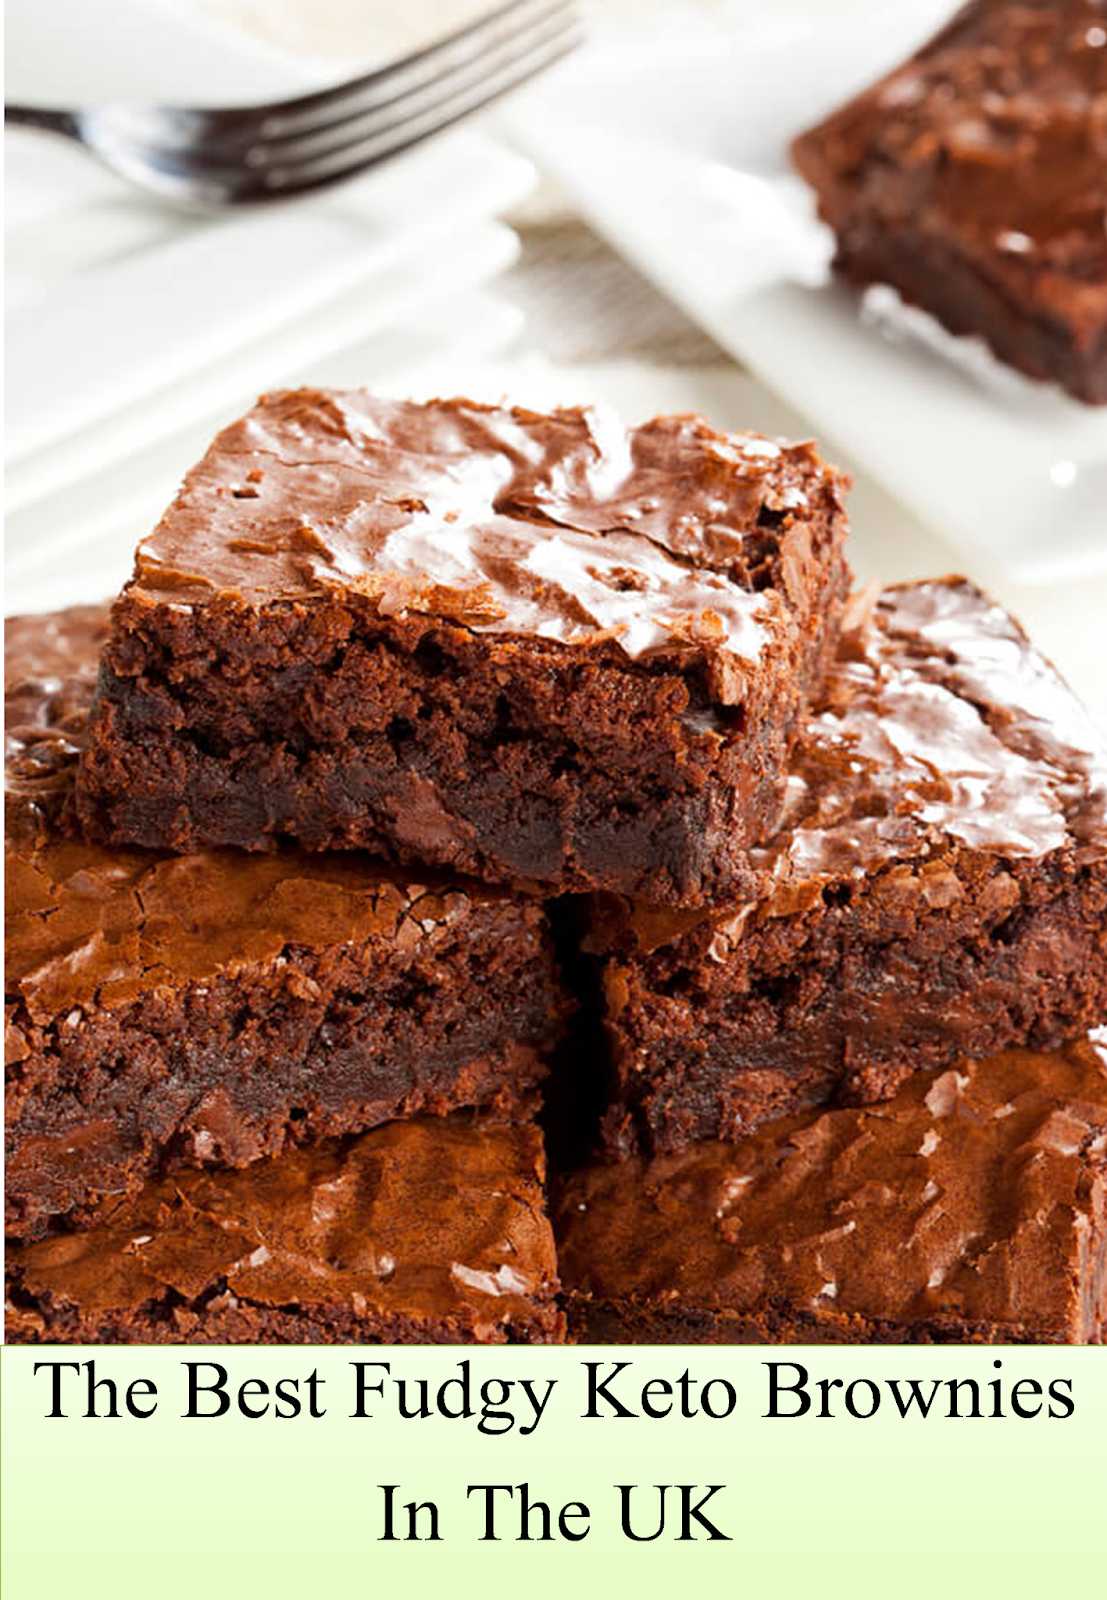 The Best Fudgy Keto Brownies In The UK | Easy Recipes